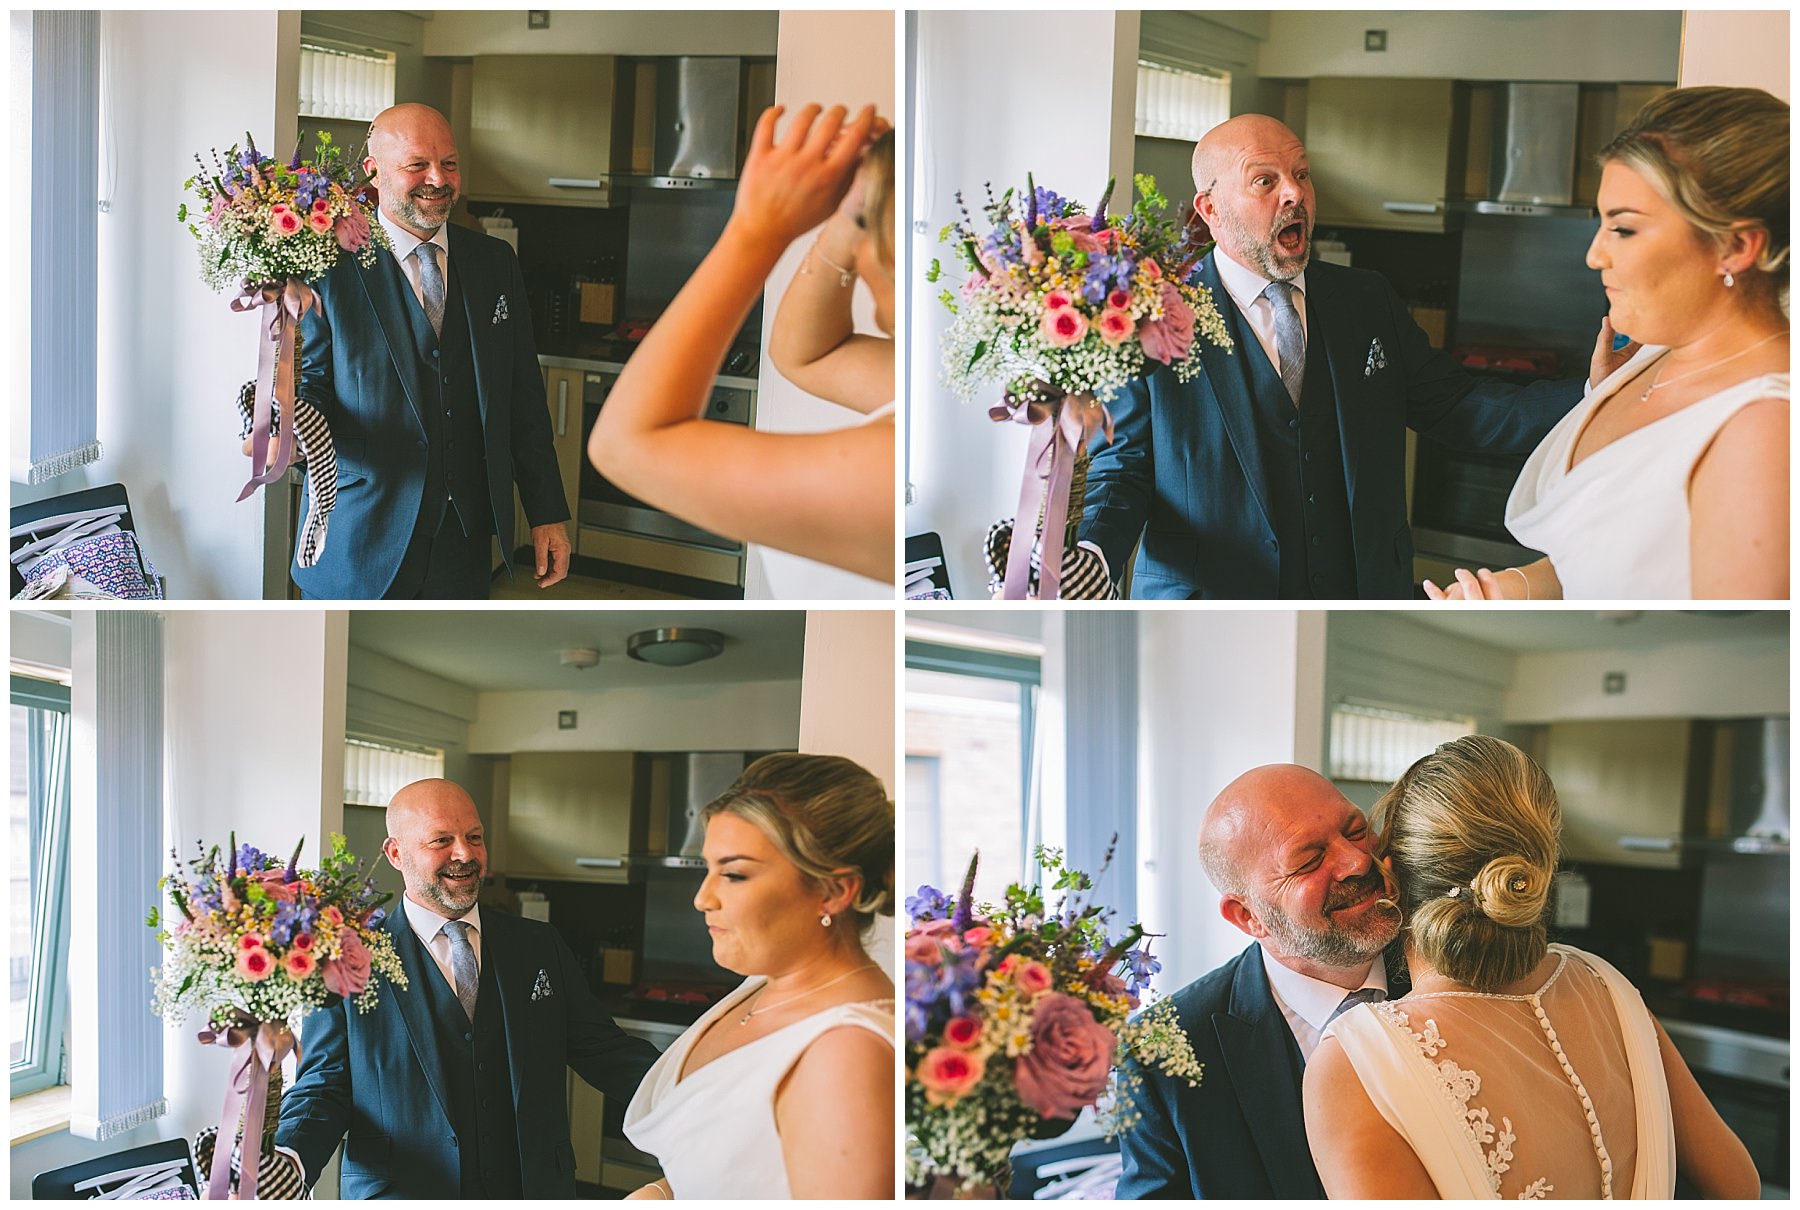 Brides father reacts to seeing his daughetrin her wedding dress